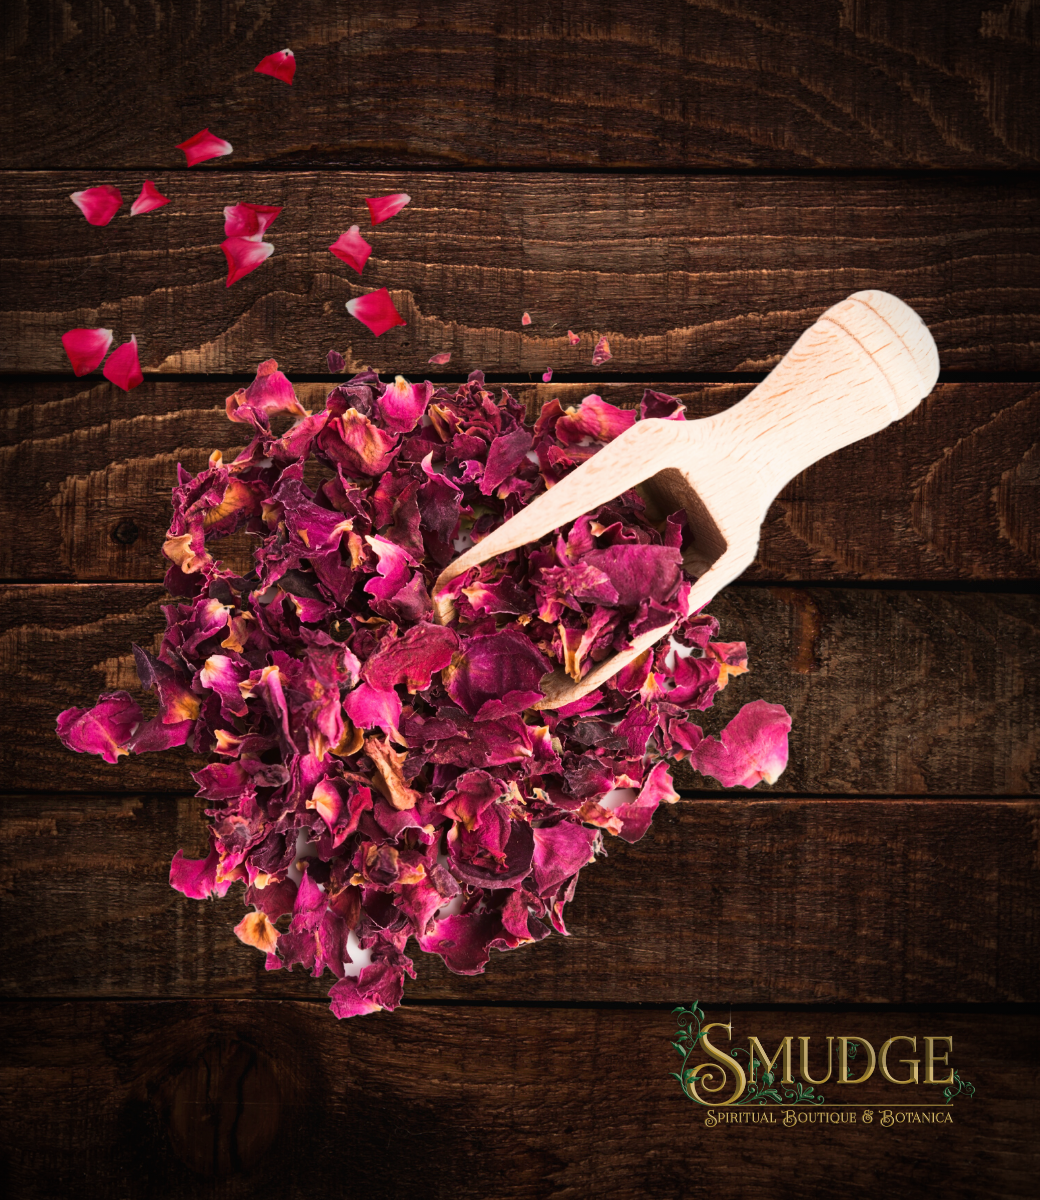 5 Reasons Rose Petals are Magical for Your Skin